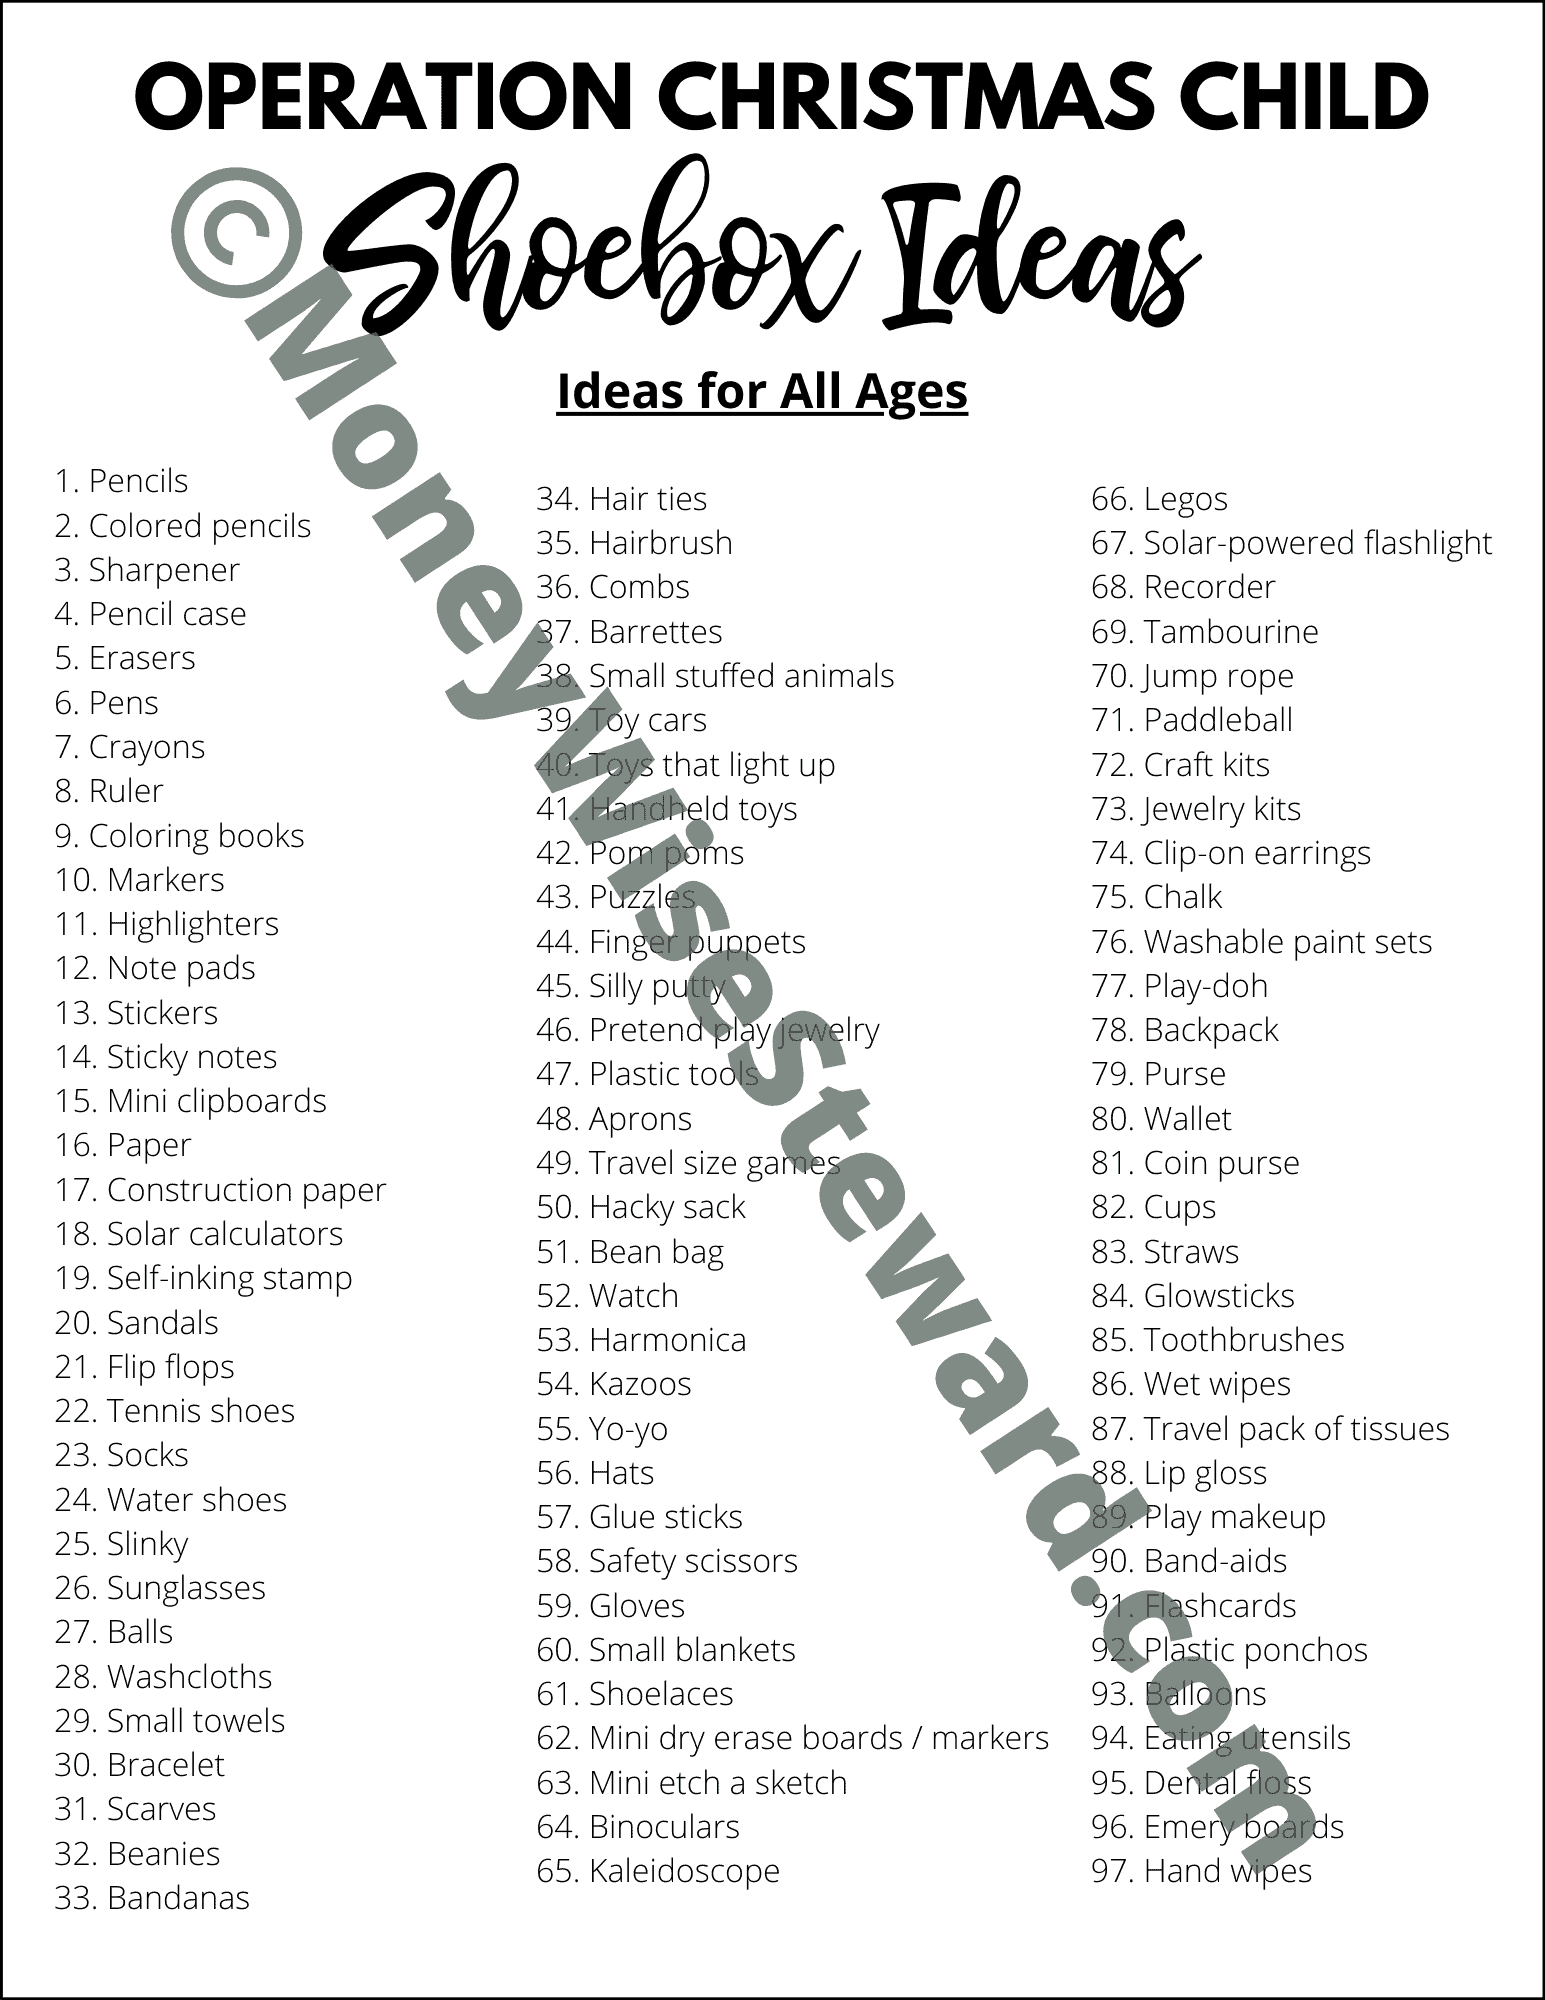 Over 125 Operation Christmas Child Ideas to Pack in a Shoebox